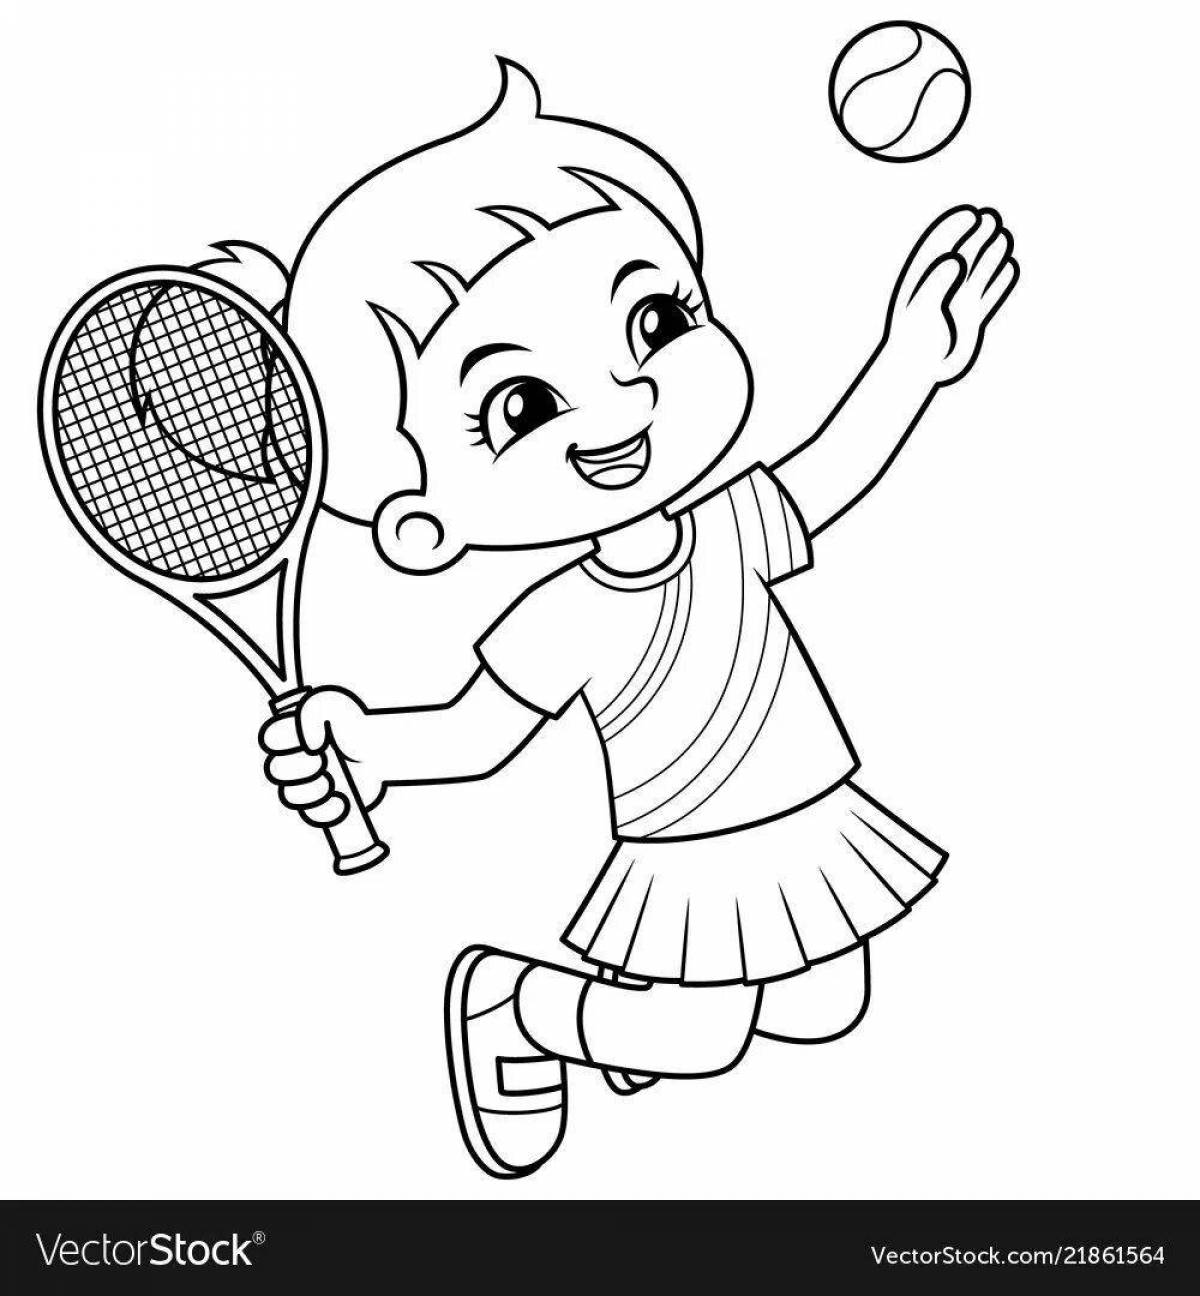 Colorful sports coloring pages for 5-6 year olds